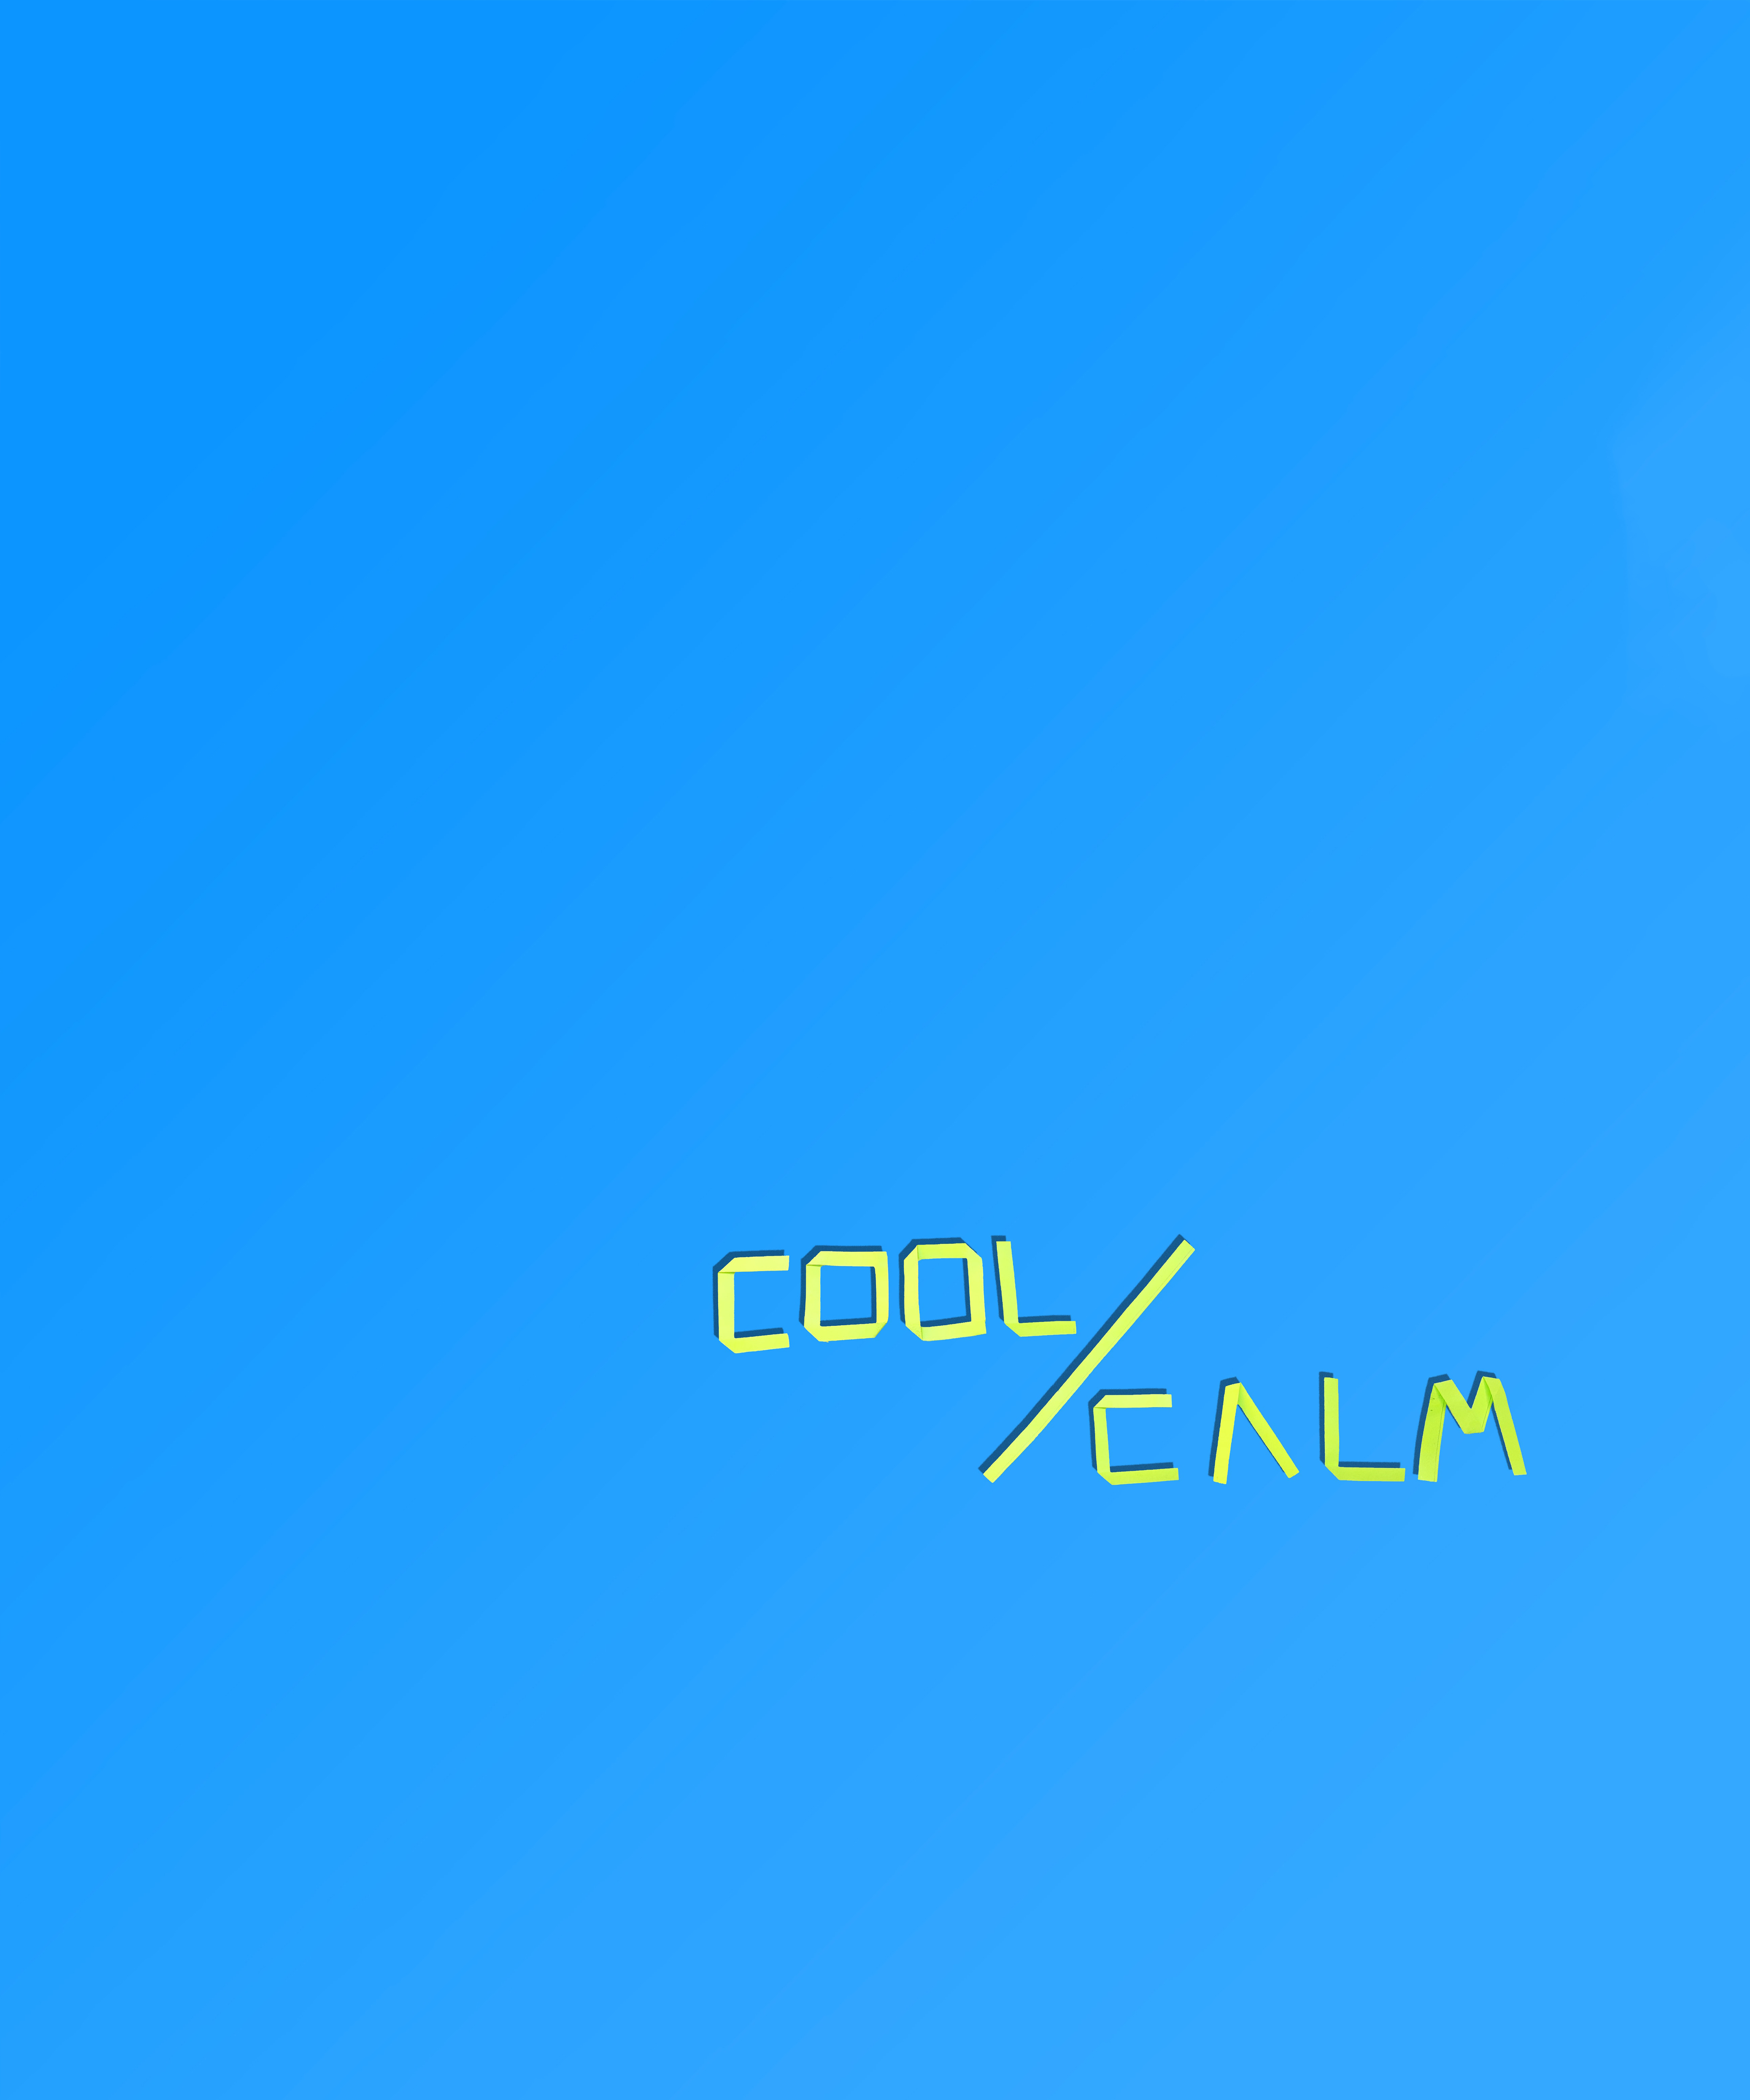 text, blue, words, cool, inscription, calmness, tranquillity, steeply QHD